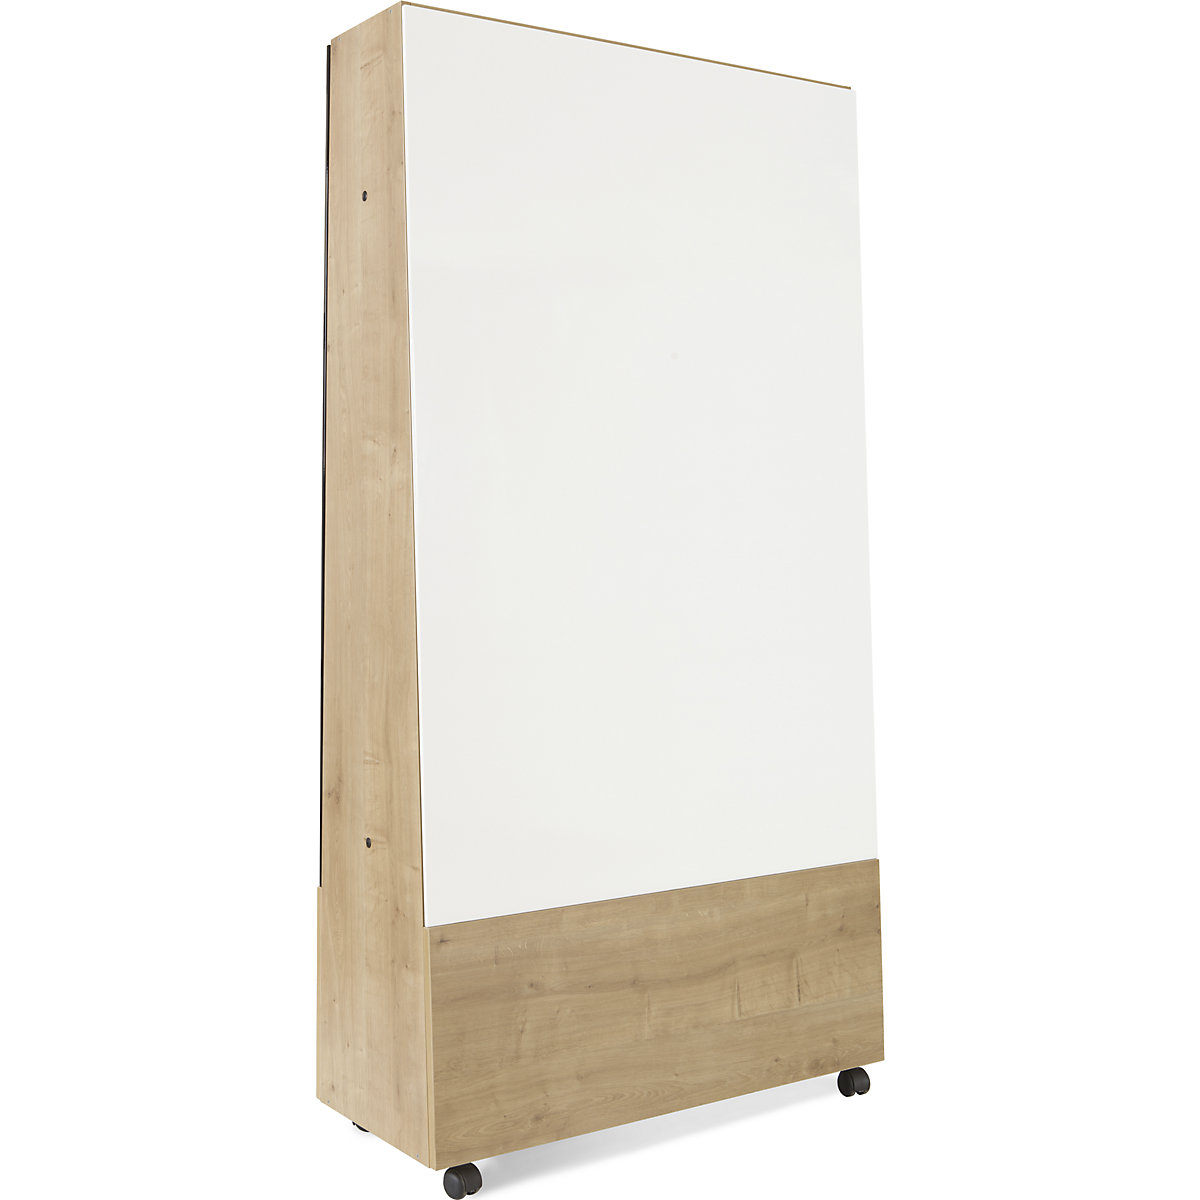 NATURAL mobile whiteboard